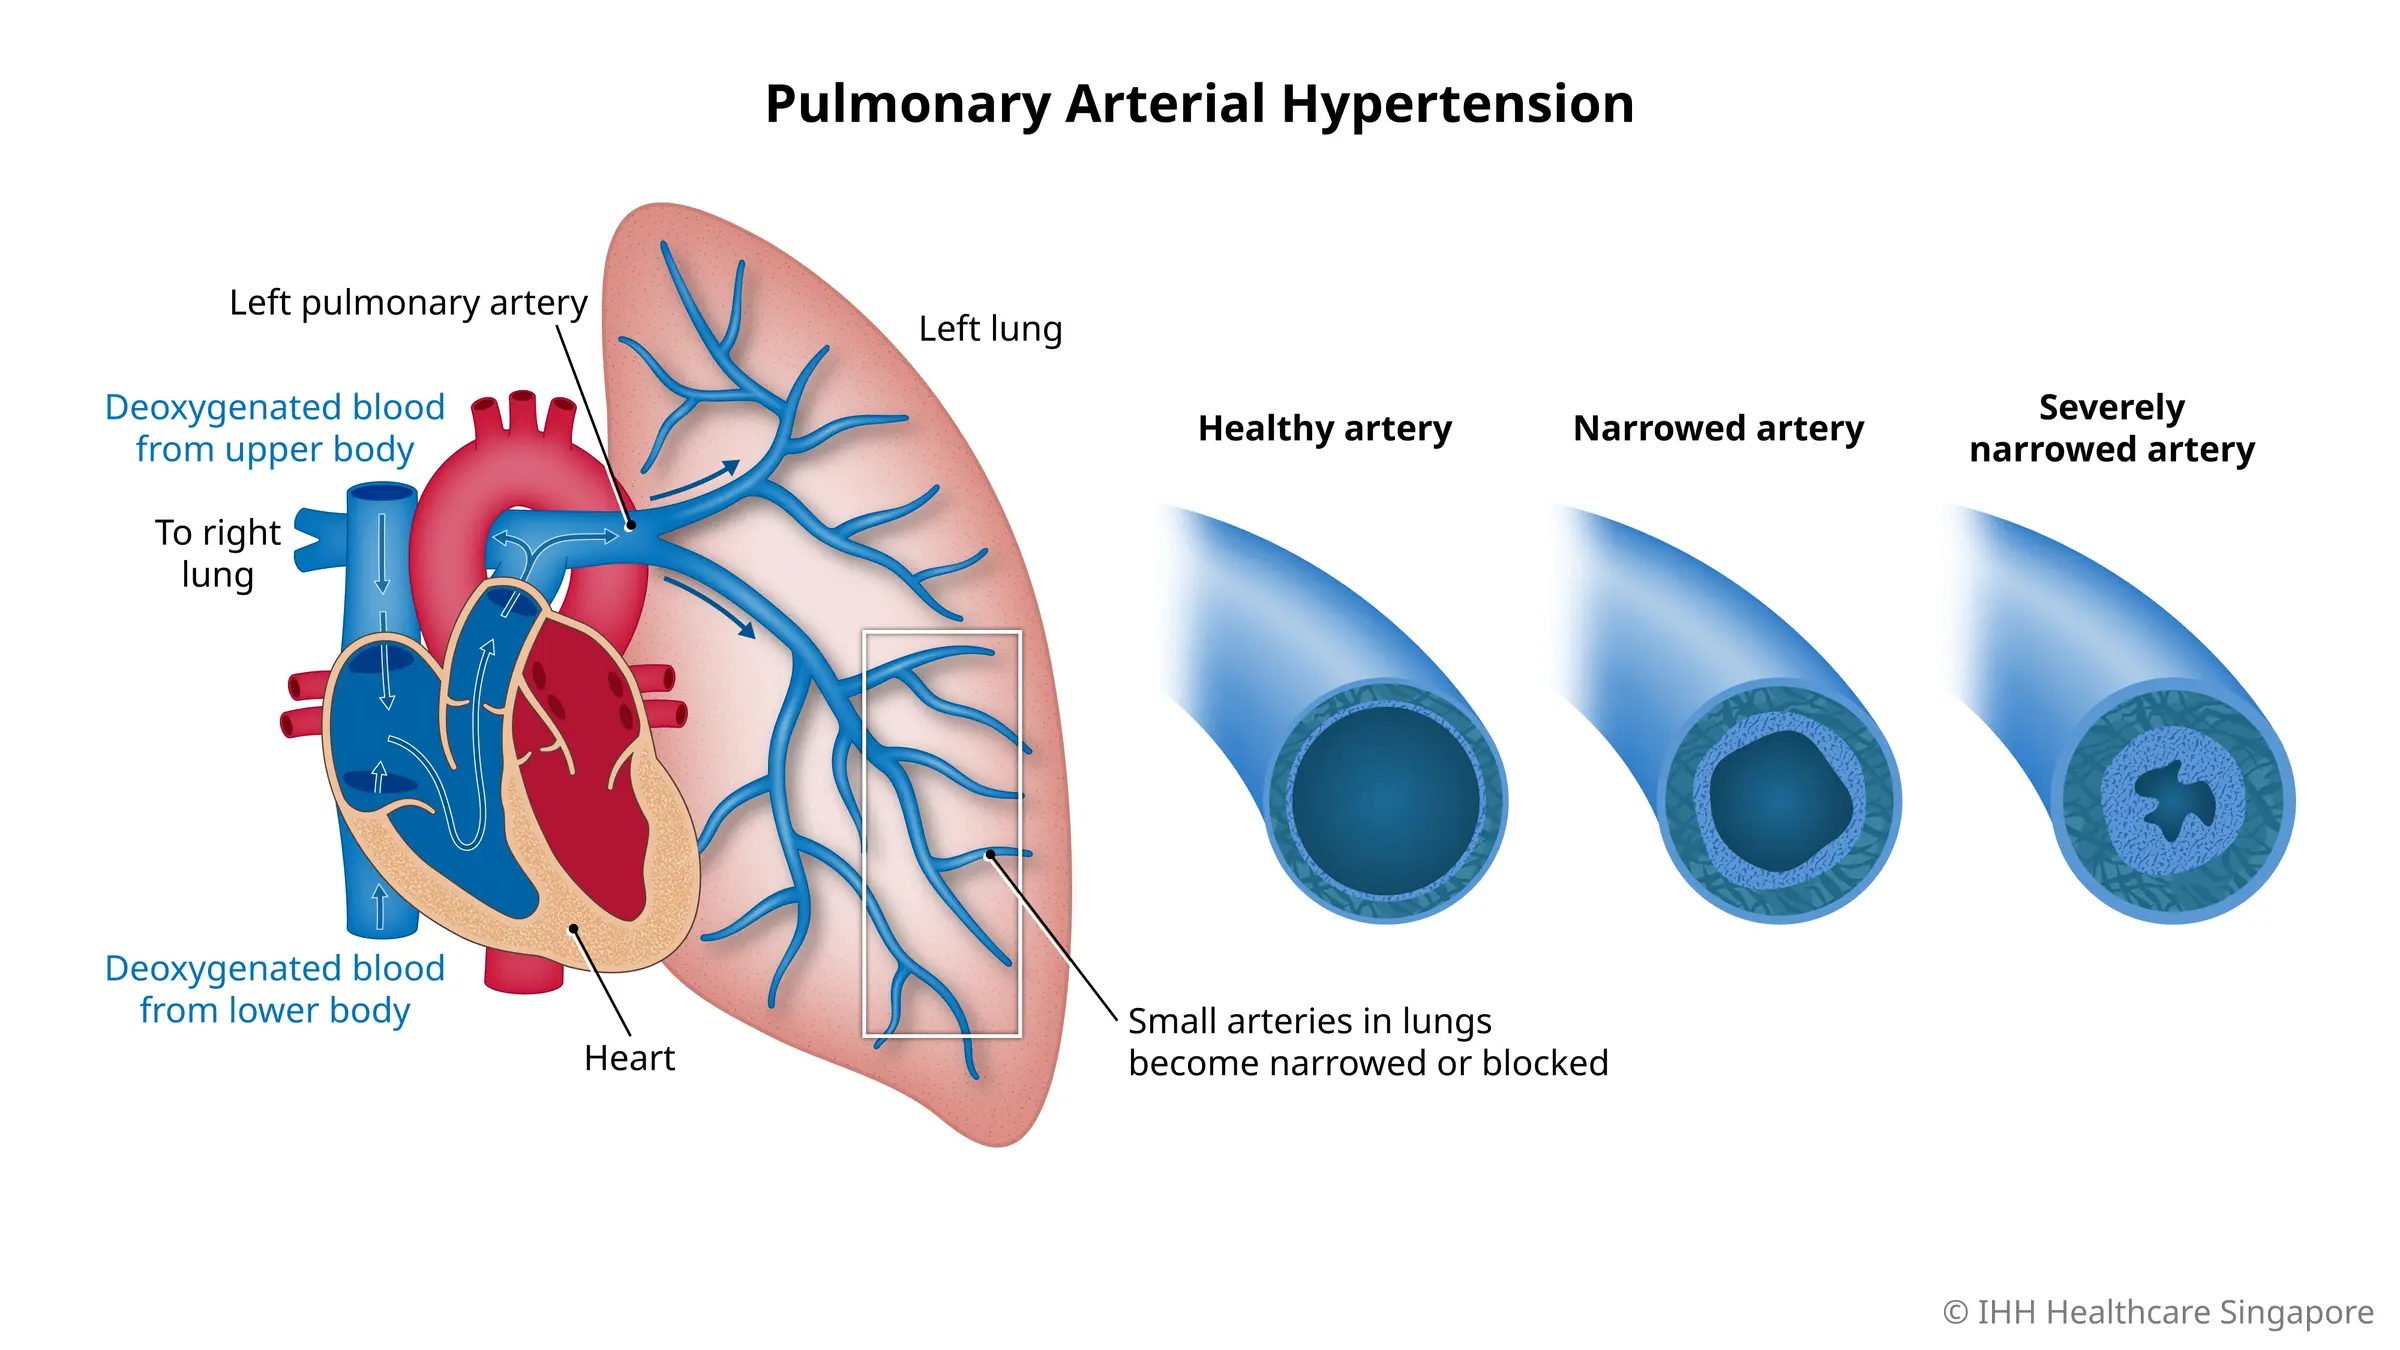 Pulmonary arterial hypertension is a form of high blood pressure where small arteries in the lungs become narrow or blocked.